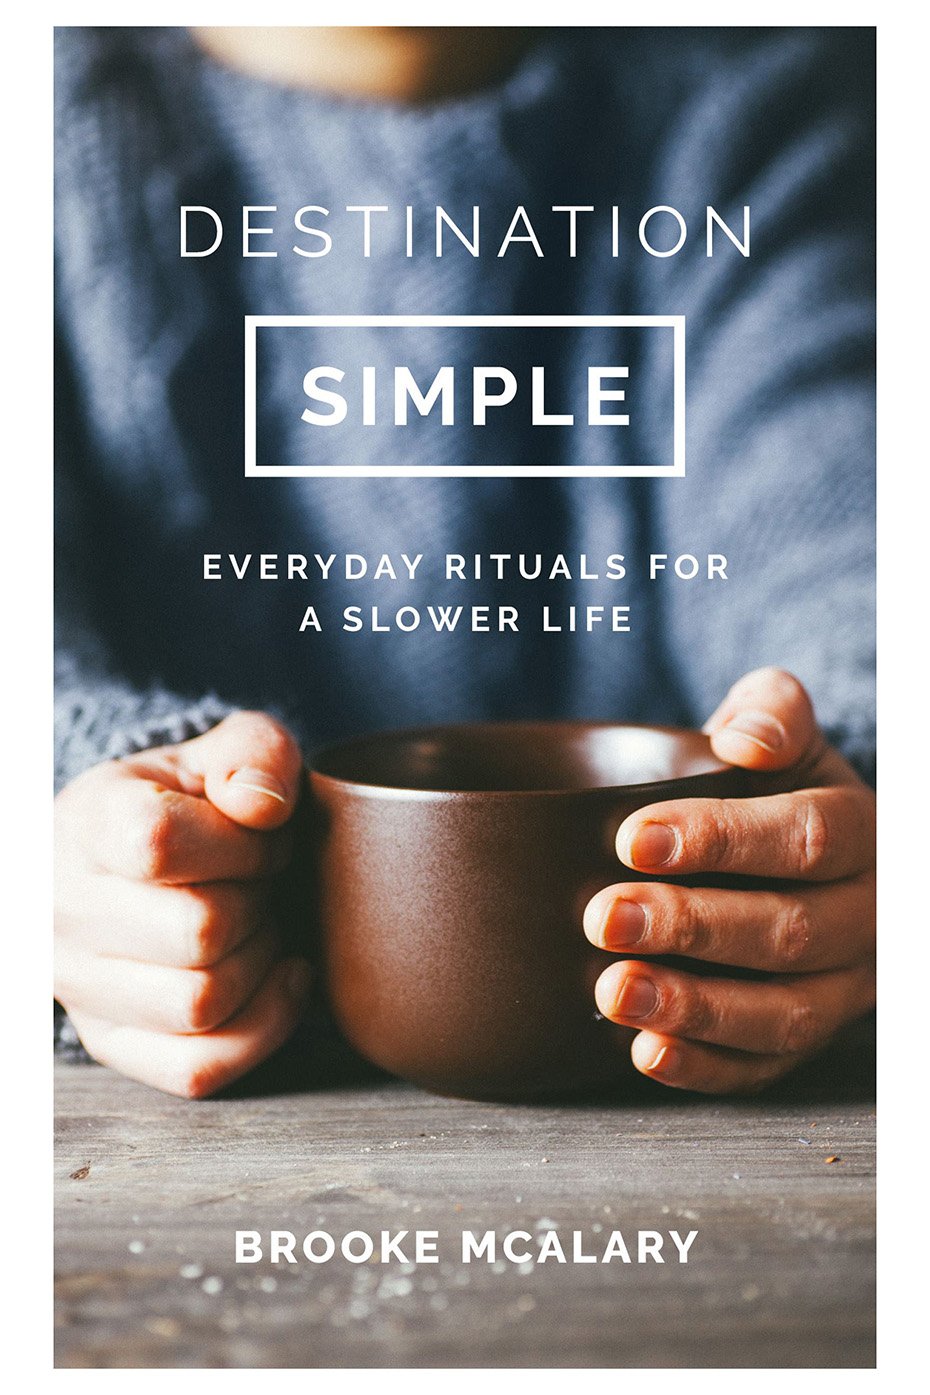 Bookspeed Destination Simple Everyday Rituals For A Slower Life Book By Brooke Mcalary